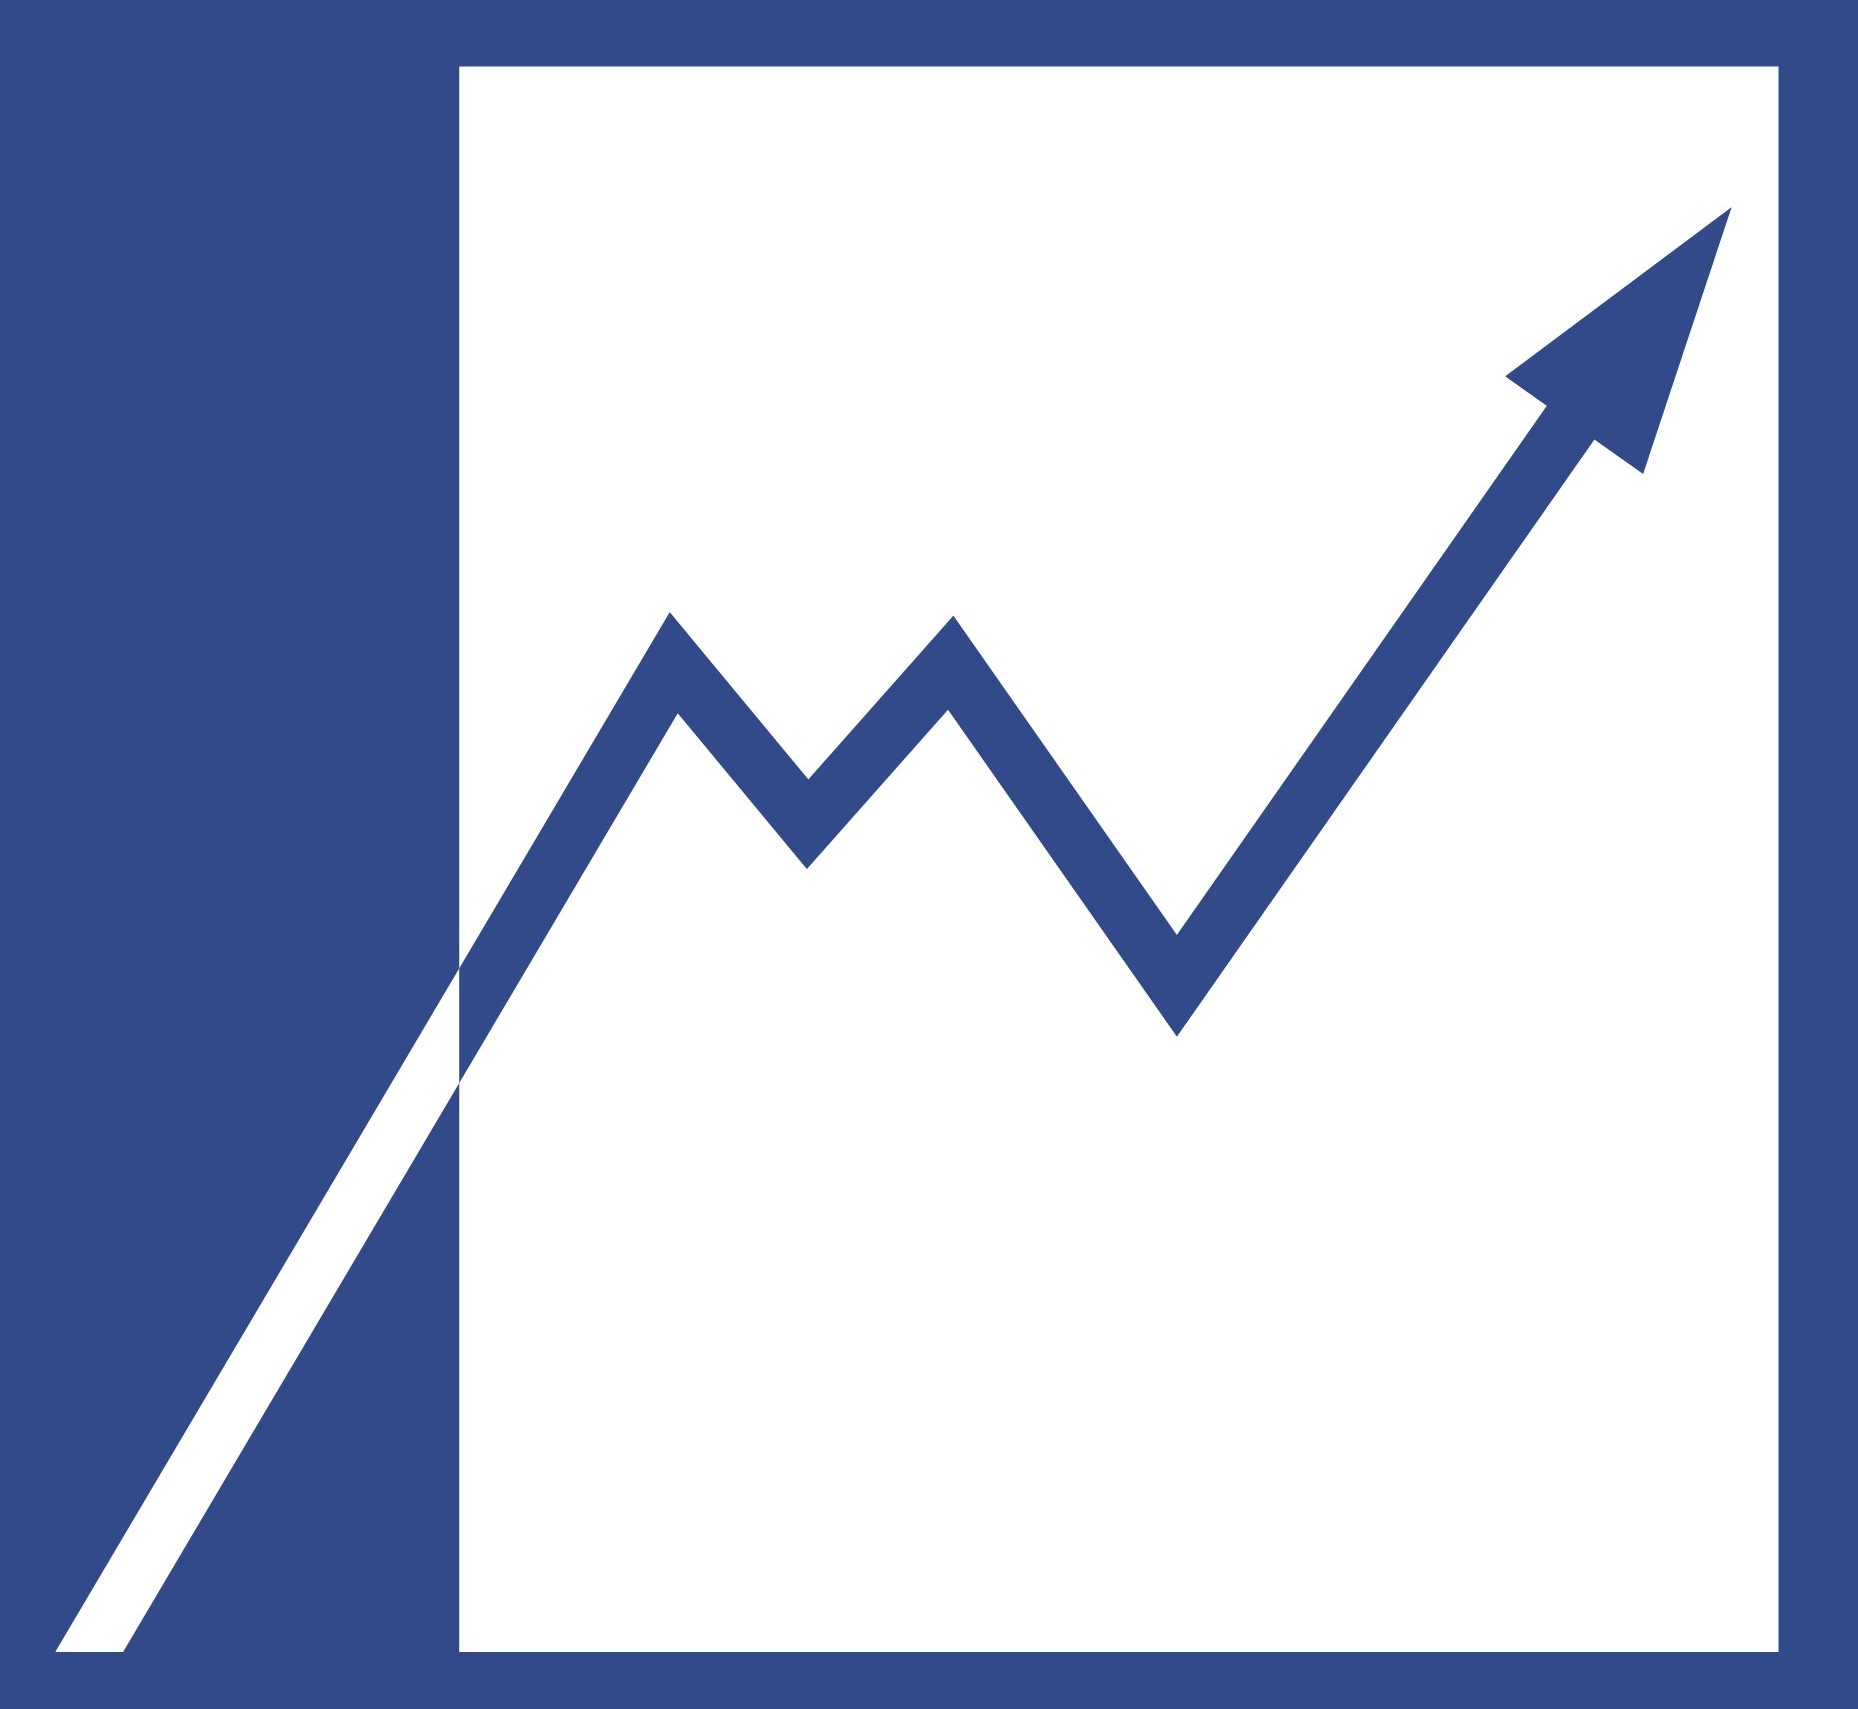 Blue graph showing a grew arrow pointing in the direction of upward growth